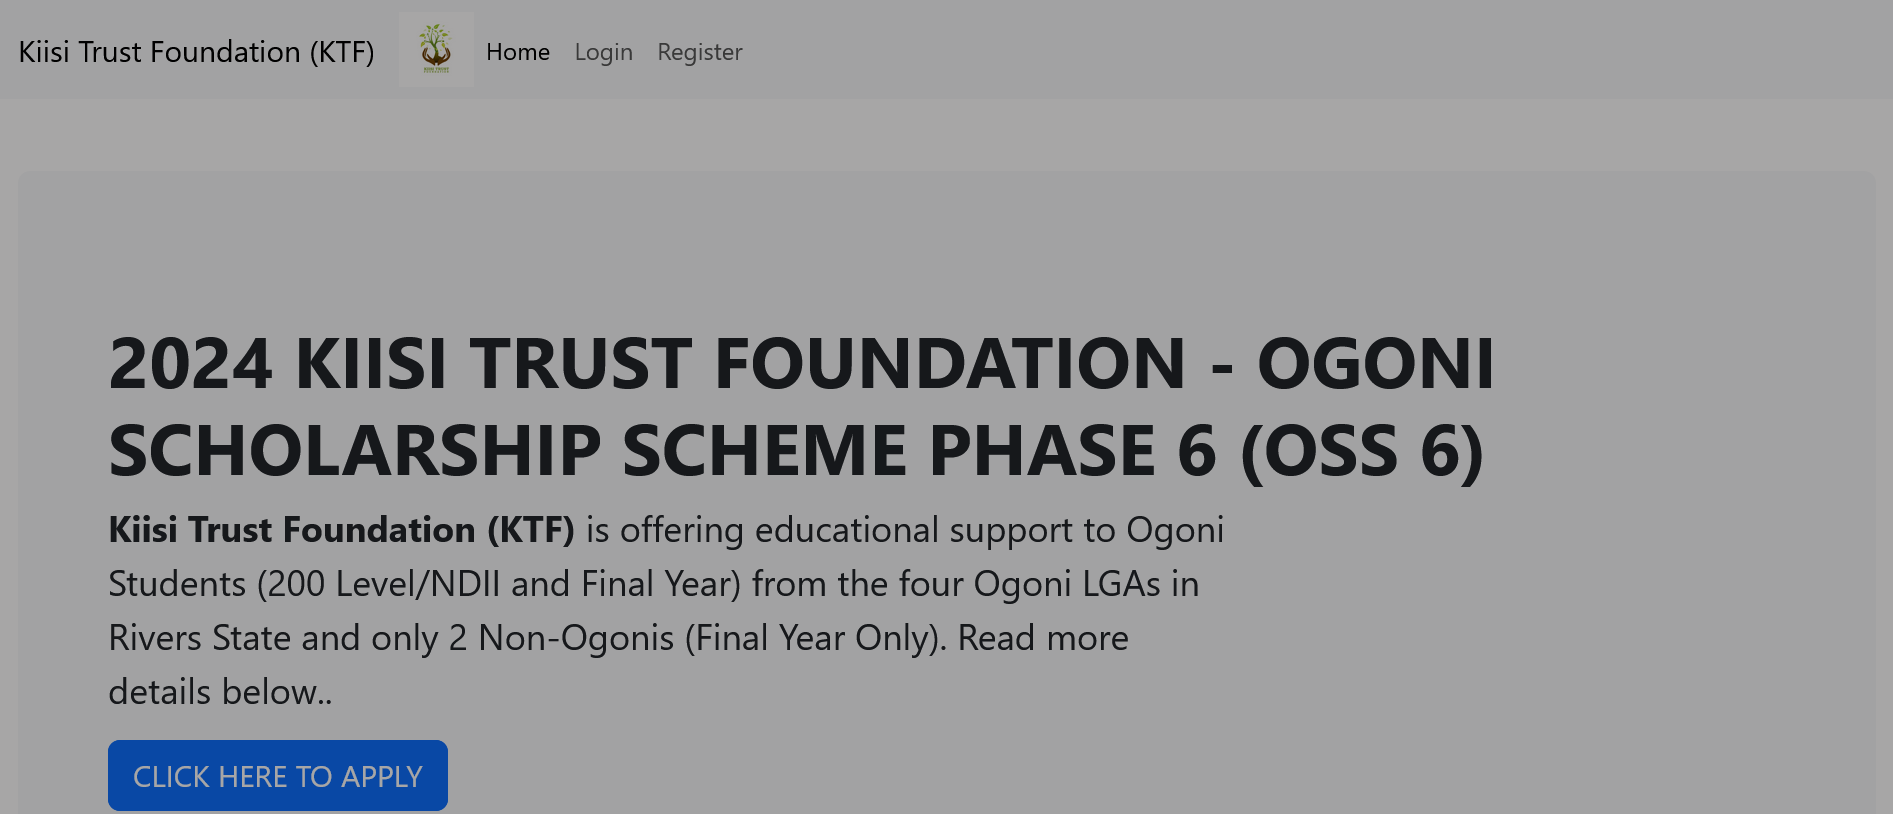 Kiisi Trust Foundation (KTF) 2024 Educational Support To Nigerian Students In Tertiary Institutions